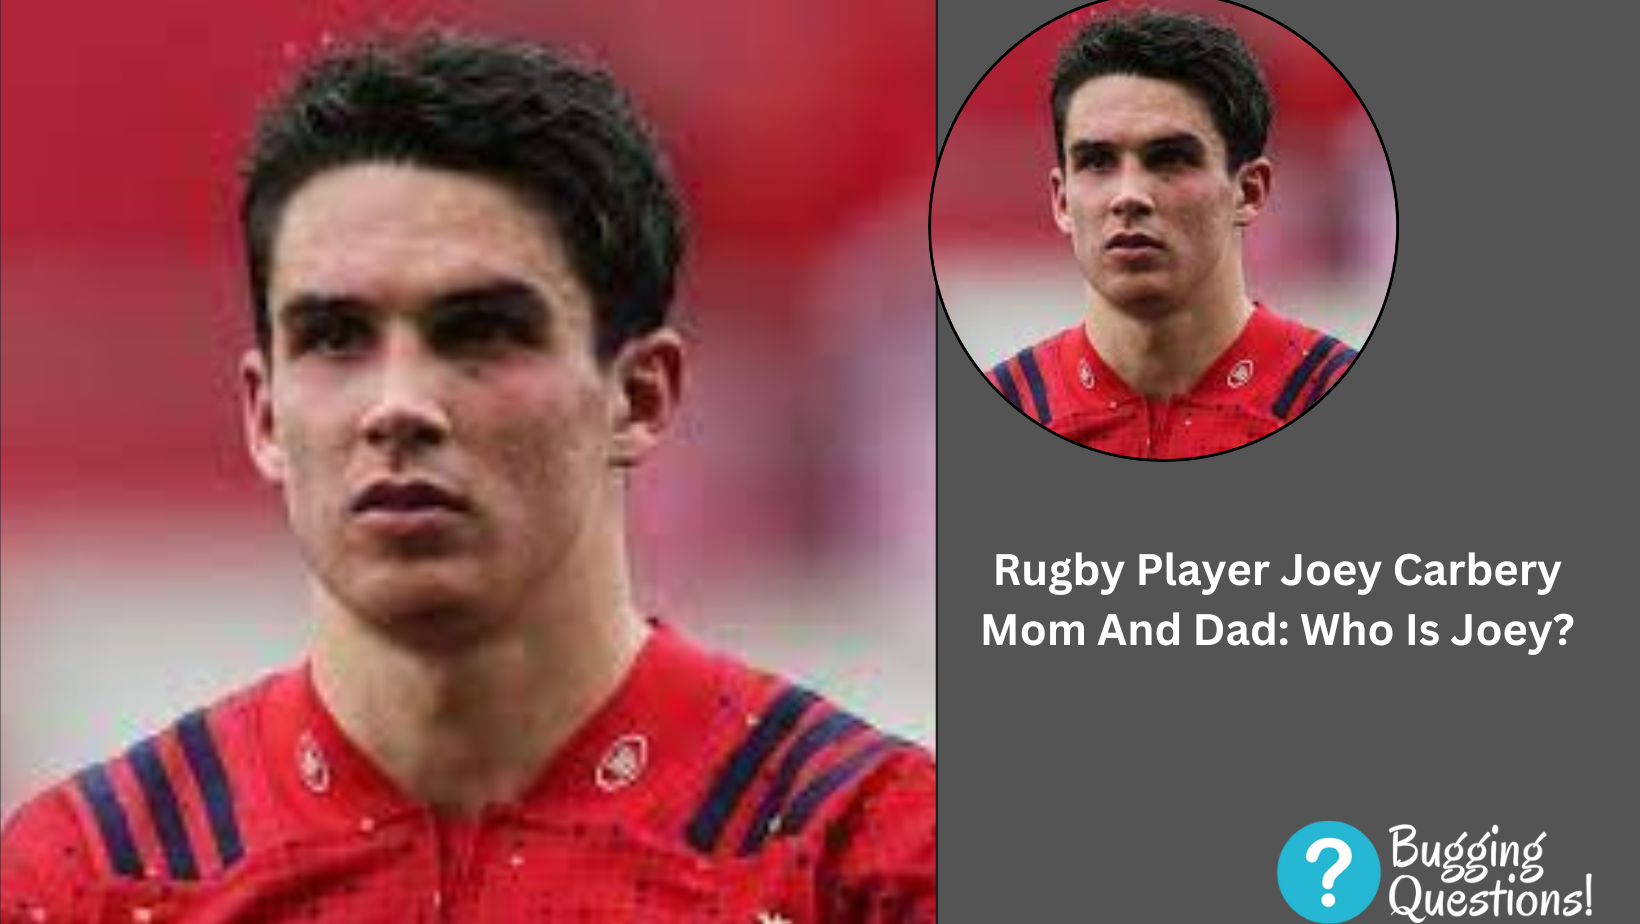 Rugby Player Joey Carbery Mom And Dad: Who Is Joey?